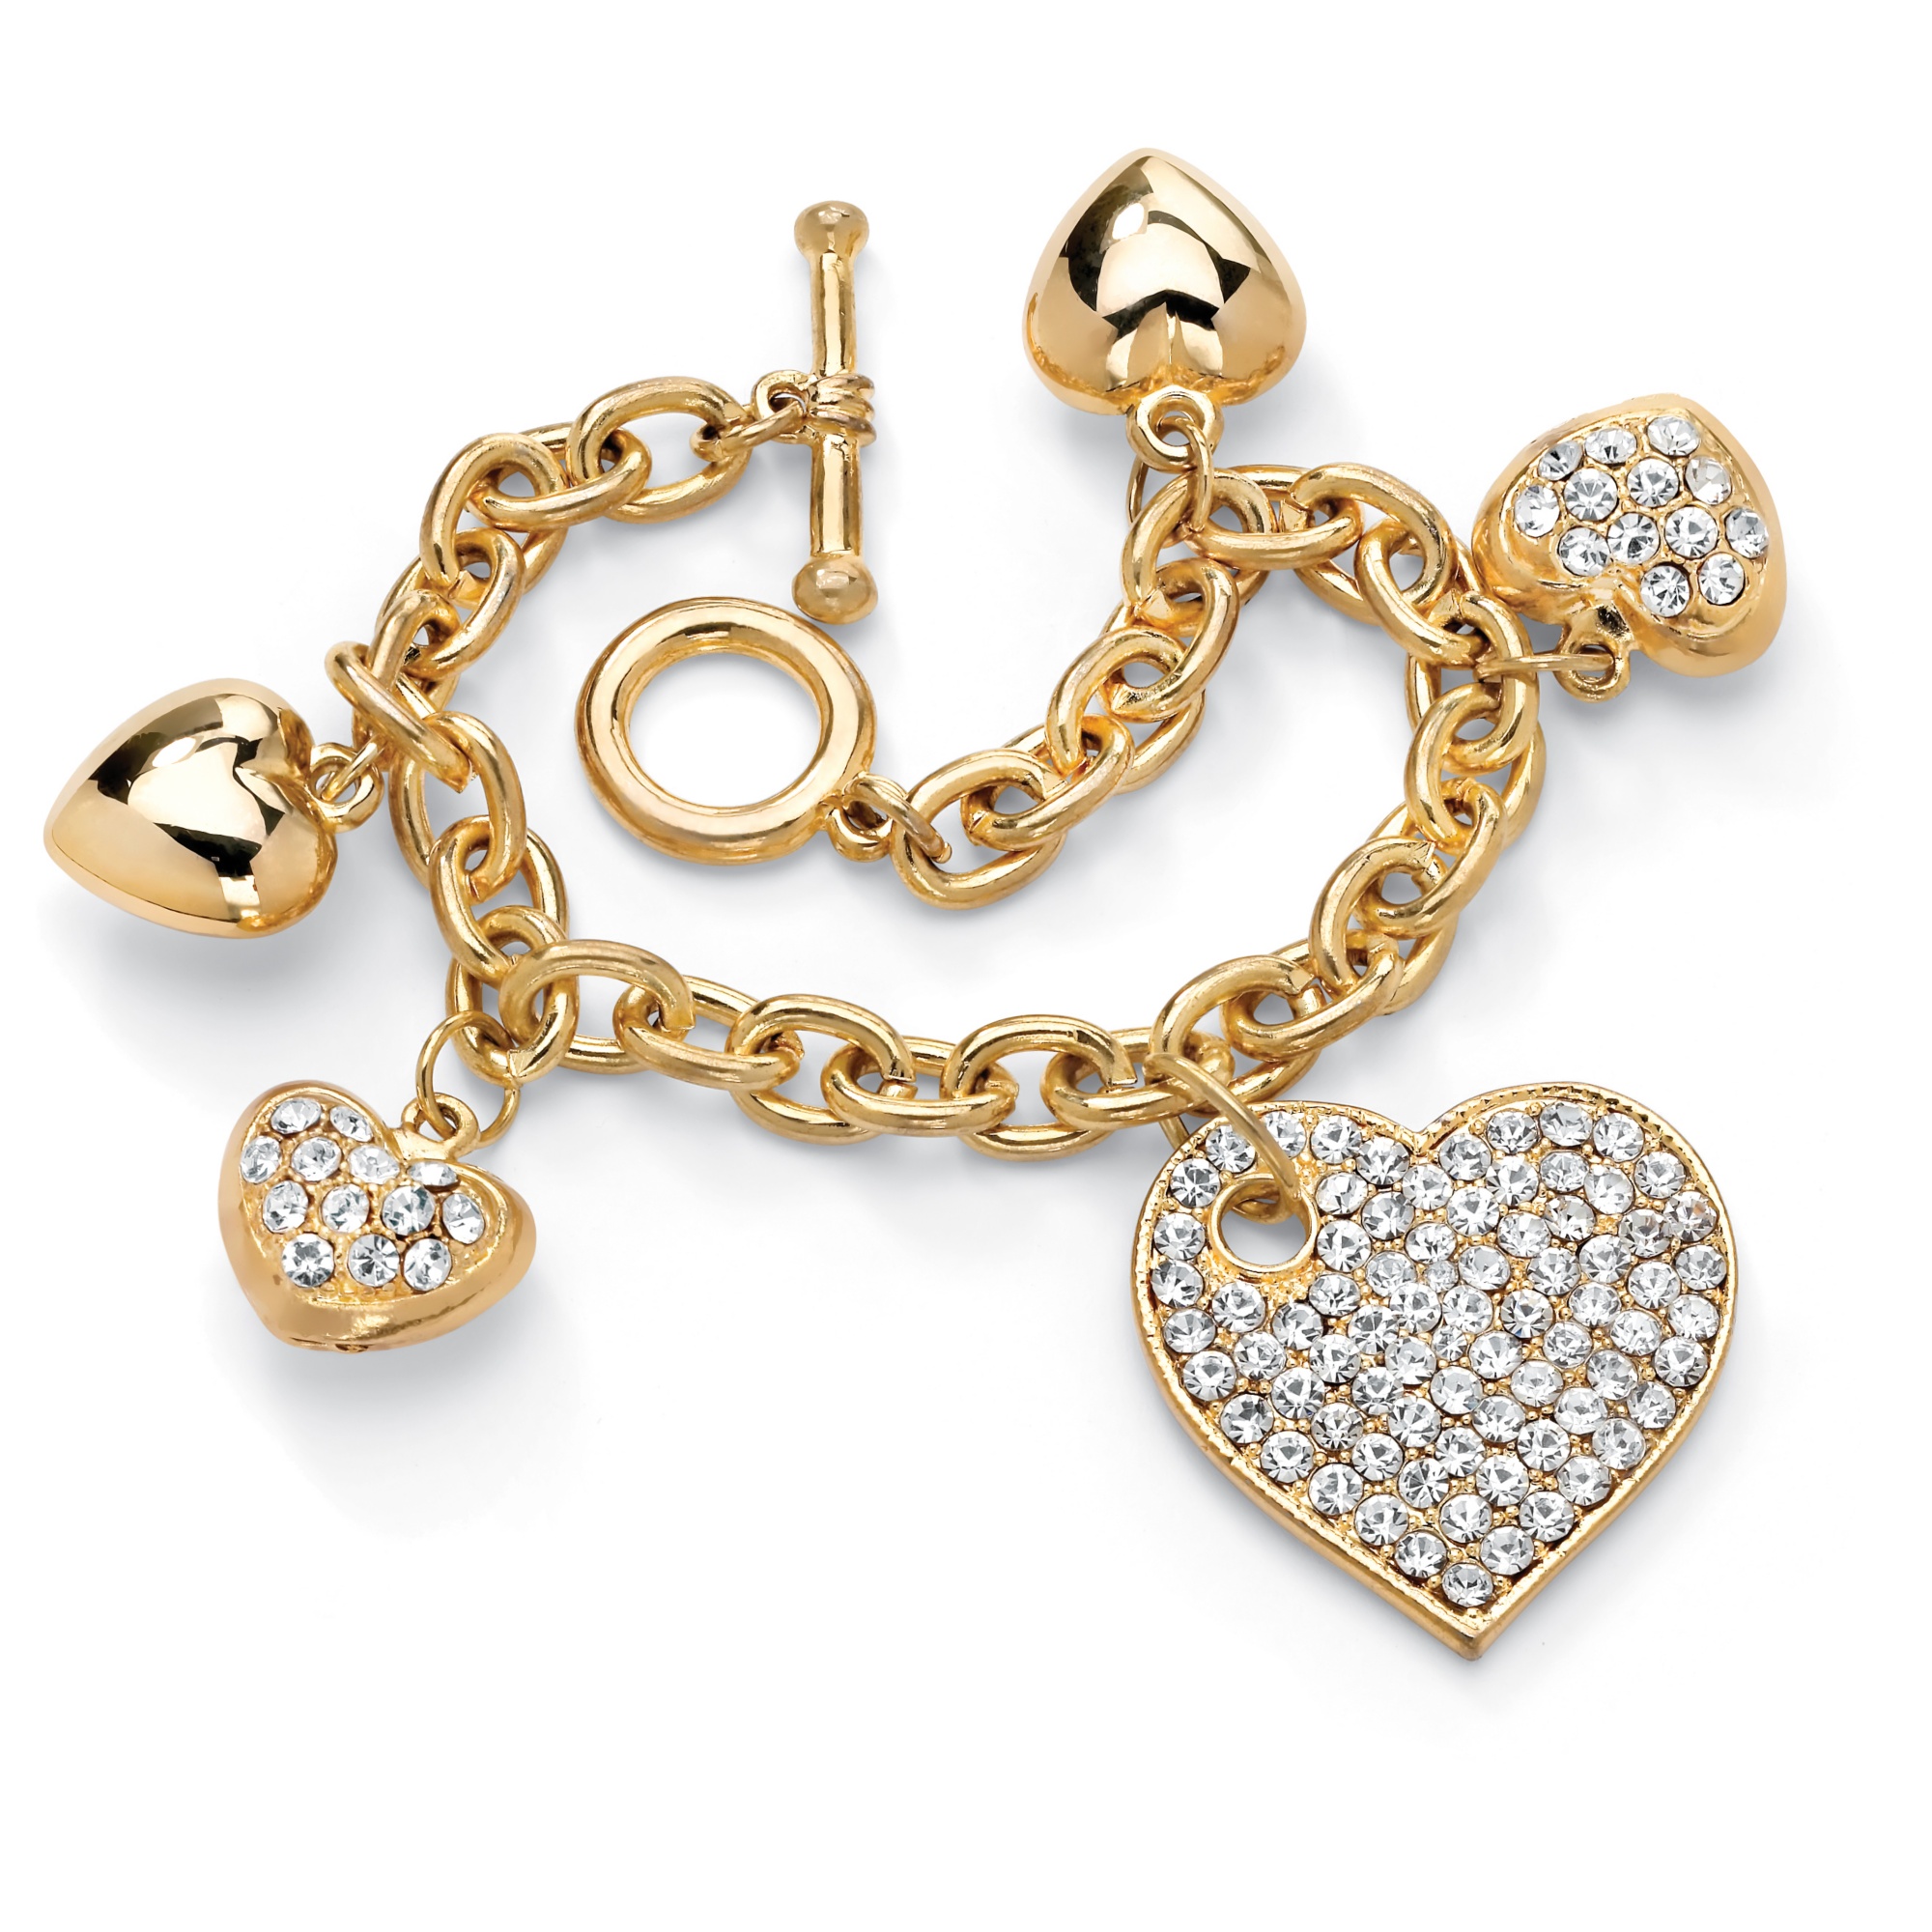 Crystal Multi-Heart Charm Bracelet in Yellow Gold Tone 8" at PalmBeach